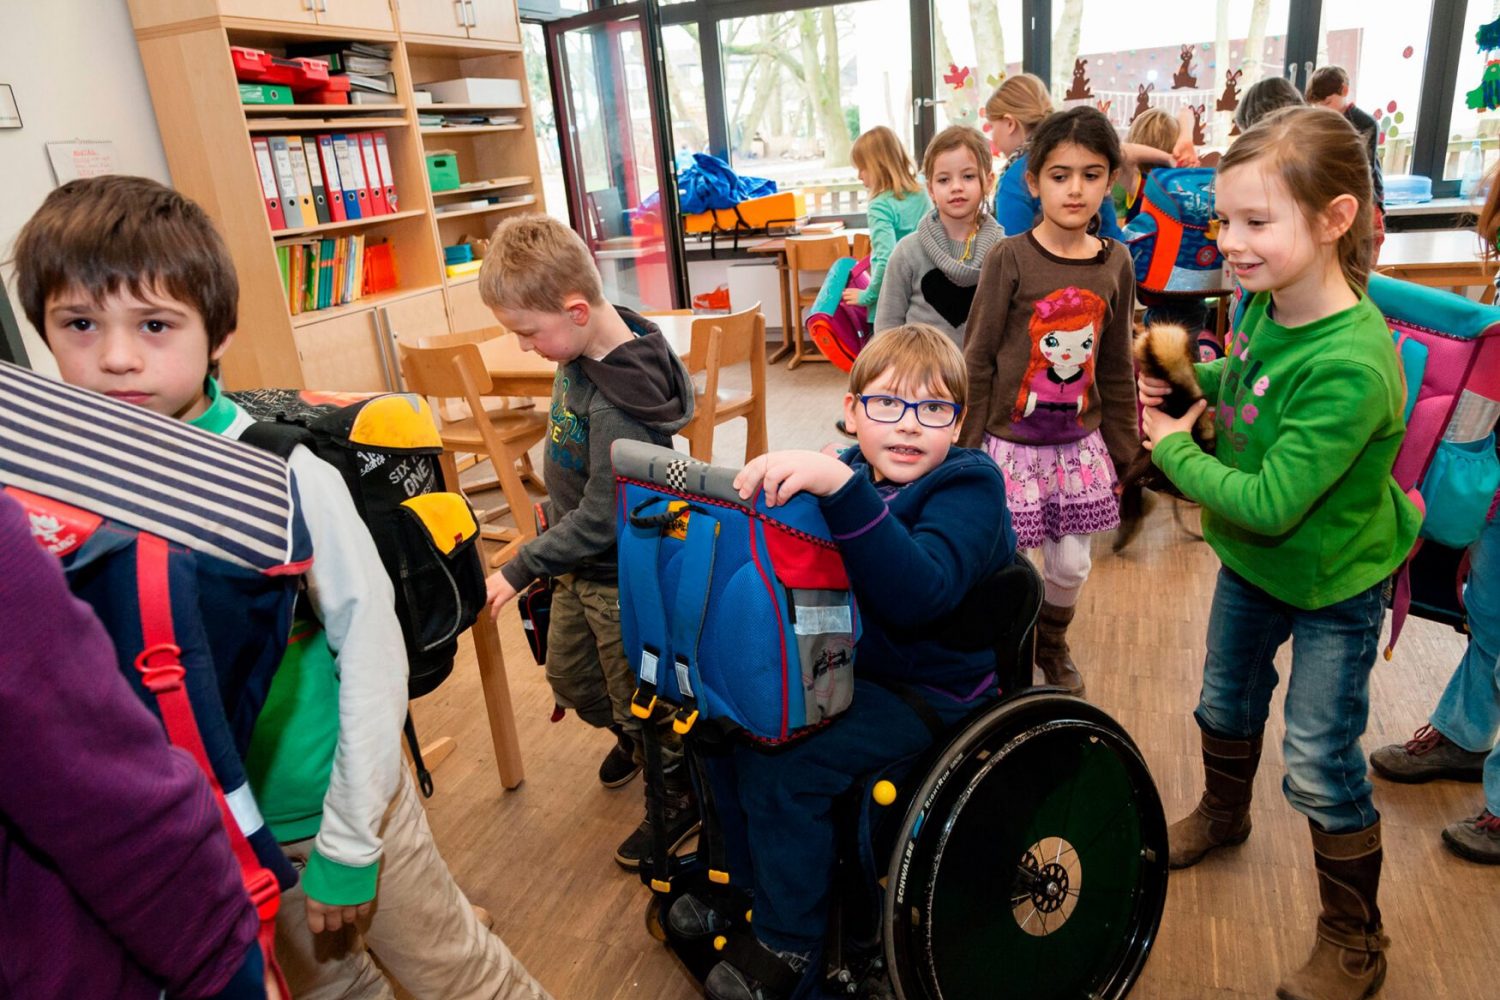 DY9JF3 Non-disabled and disabled students (in this case a boy in a wheel chair) learn together in the same class in a primary school.